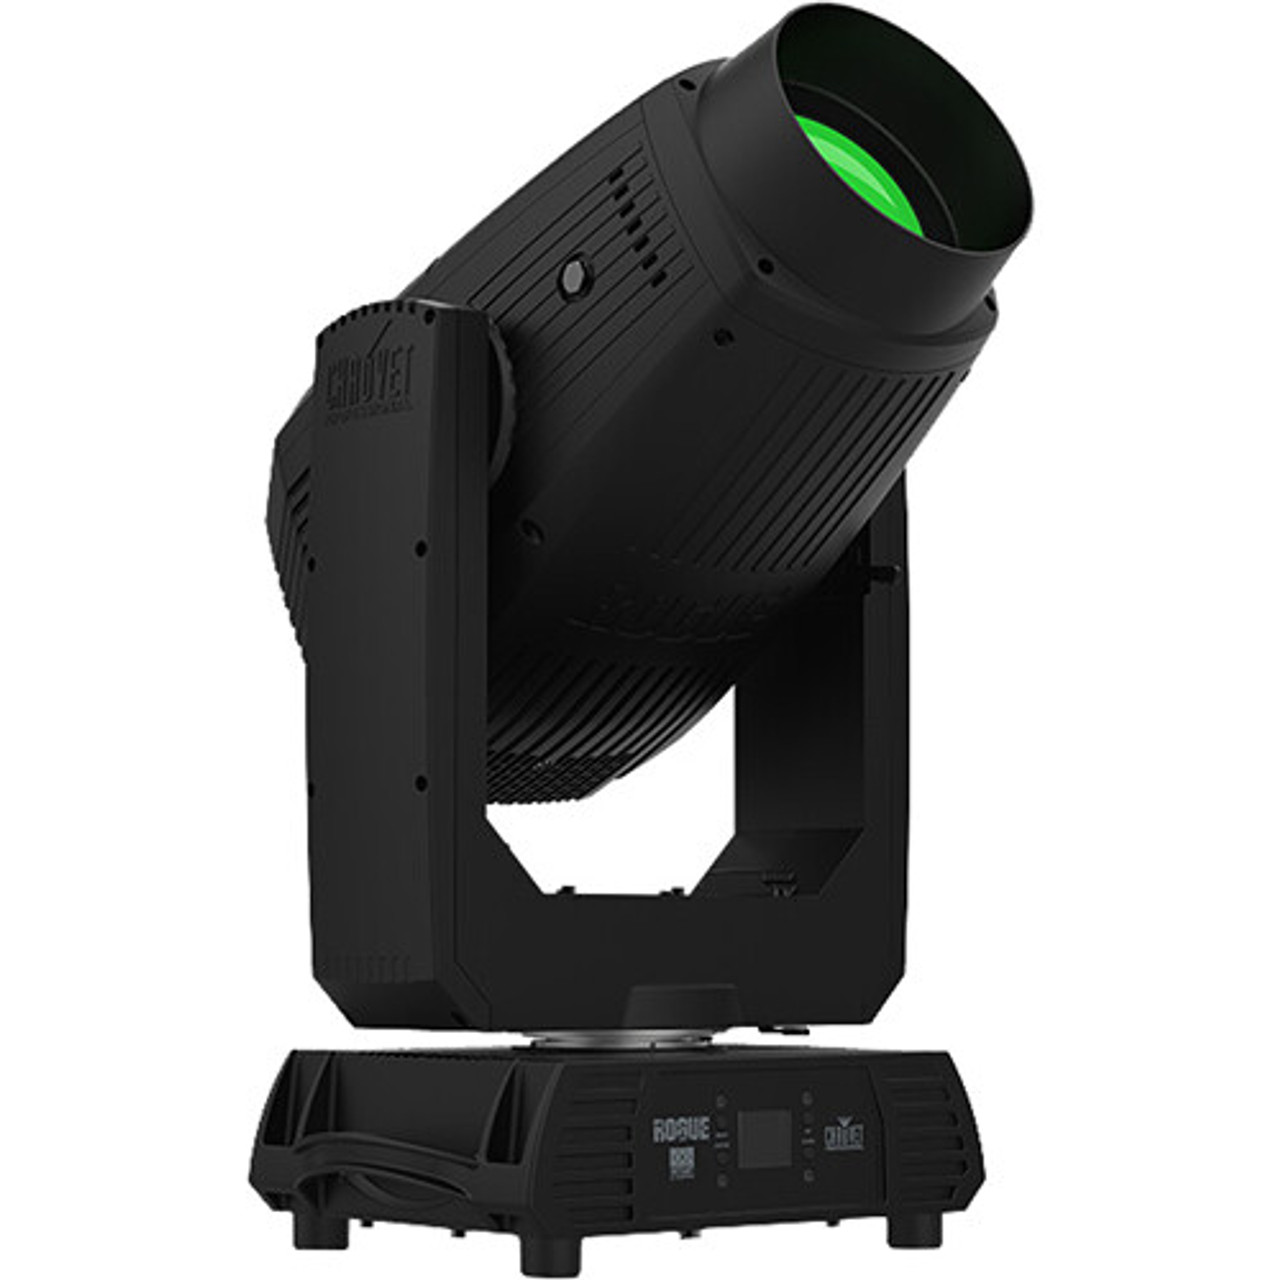 CHAUVET PROFESSIONAL Rogue Outcast 2 Hybrid Outdoor-Ready IP65 Spot, Beam, and Wash Moving Head (ROGUEOUTCAST2HYBRID)